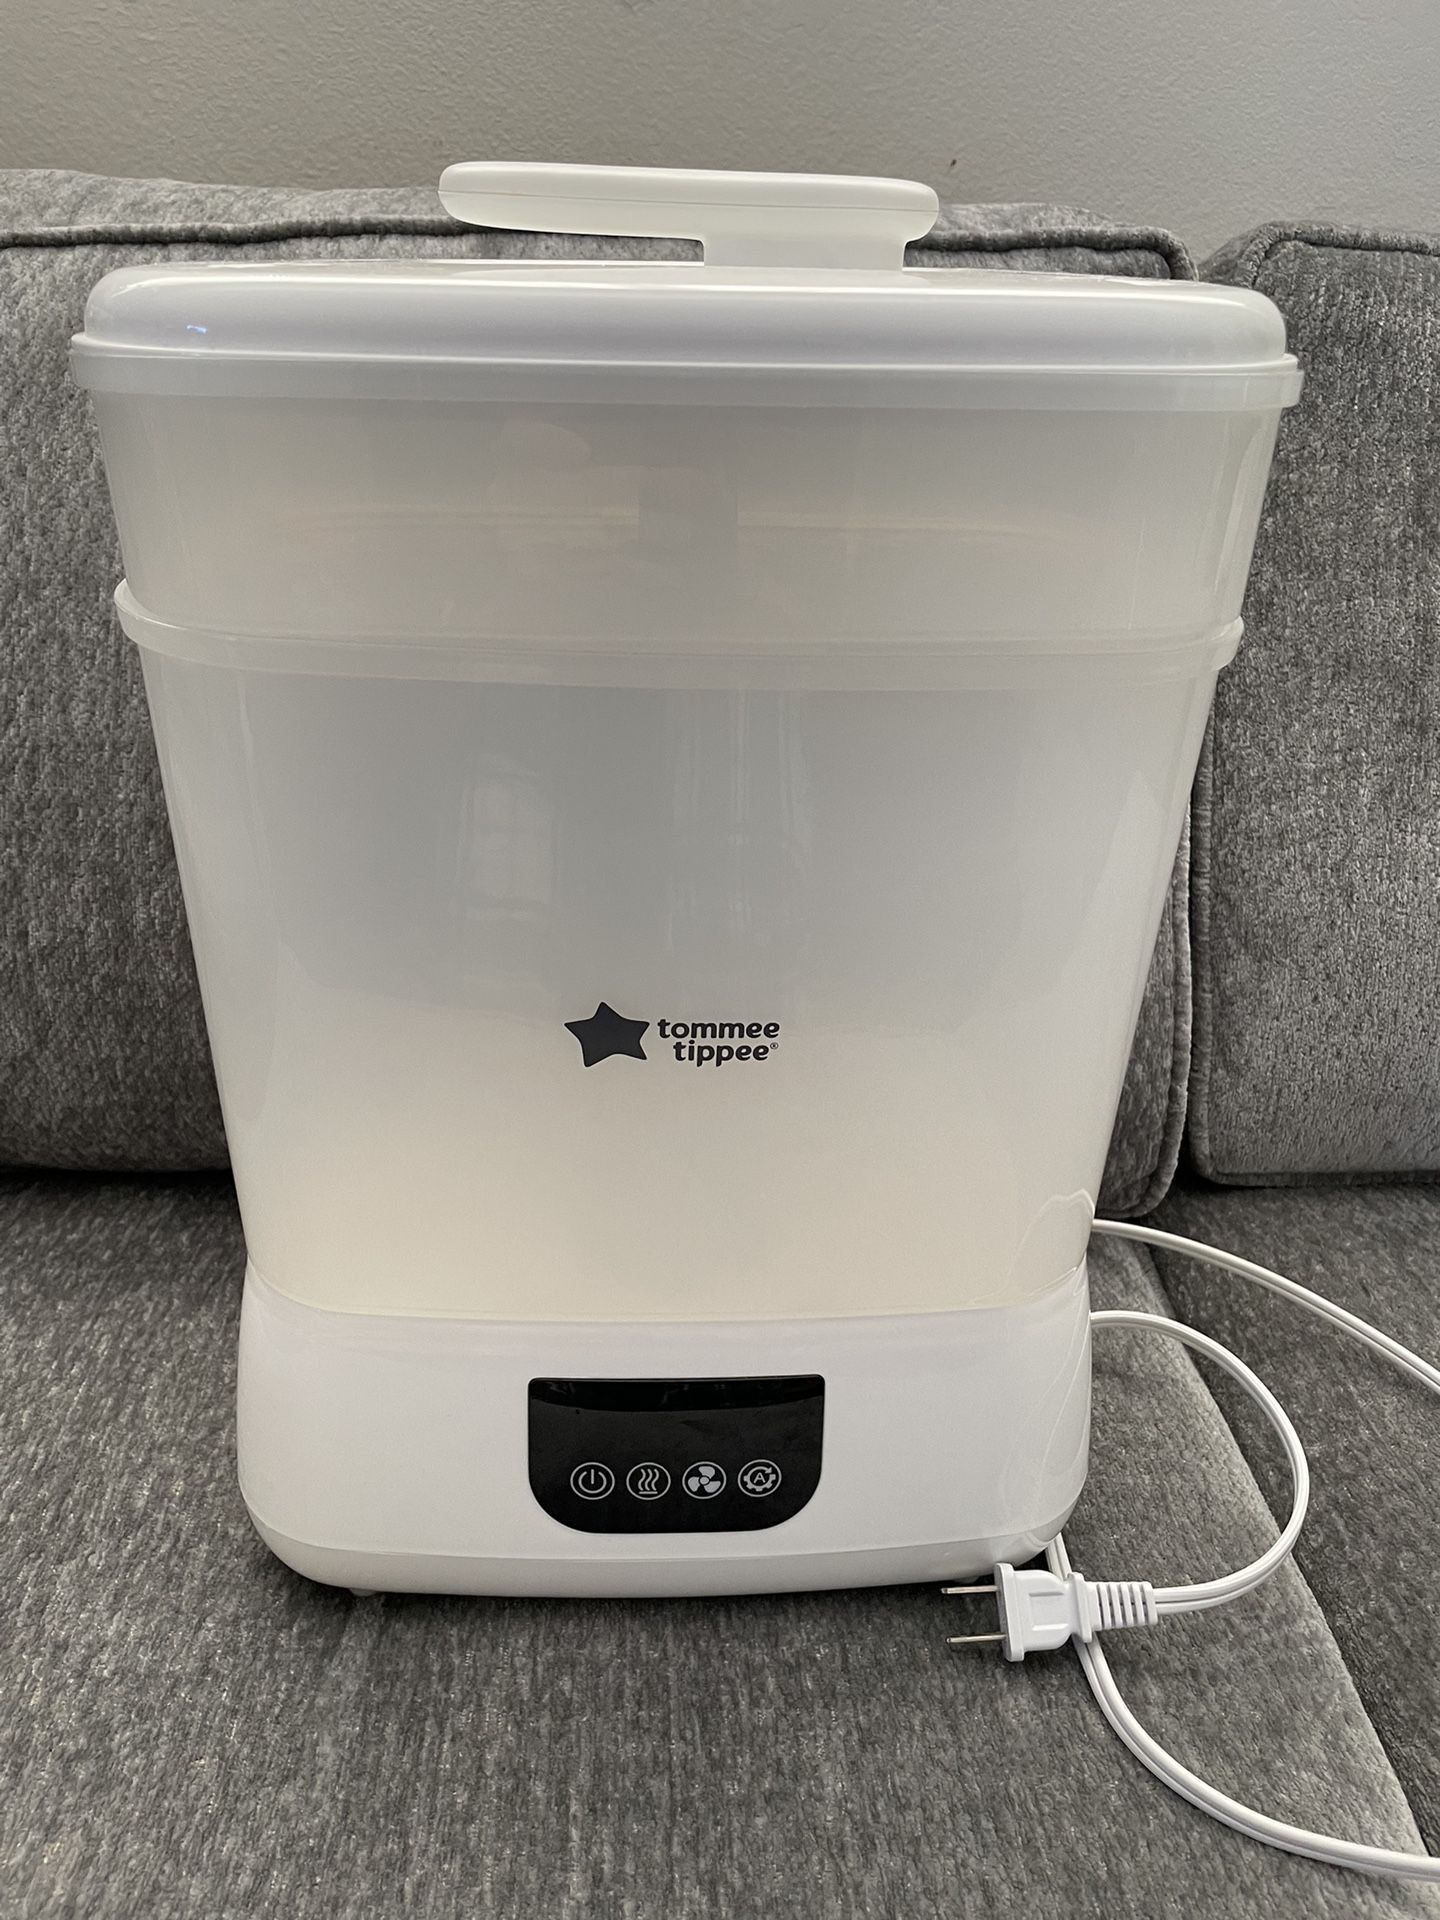 Tommee Tippee Advanced Steri-Dry Electric Sterilizer and Dryer for Baby Bottles